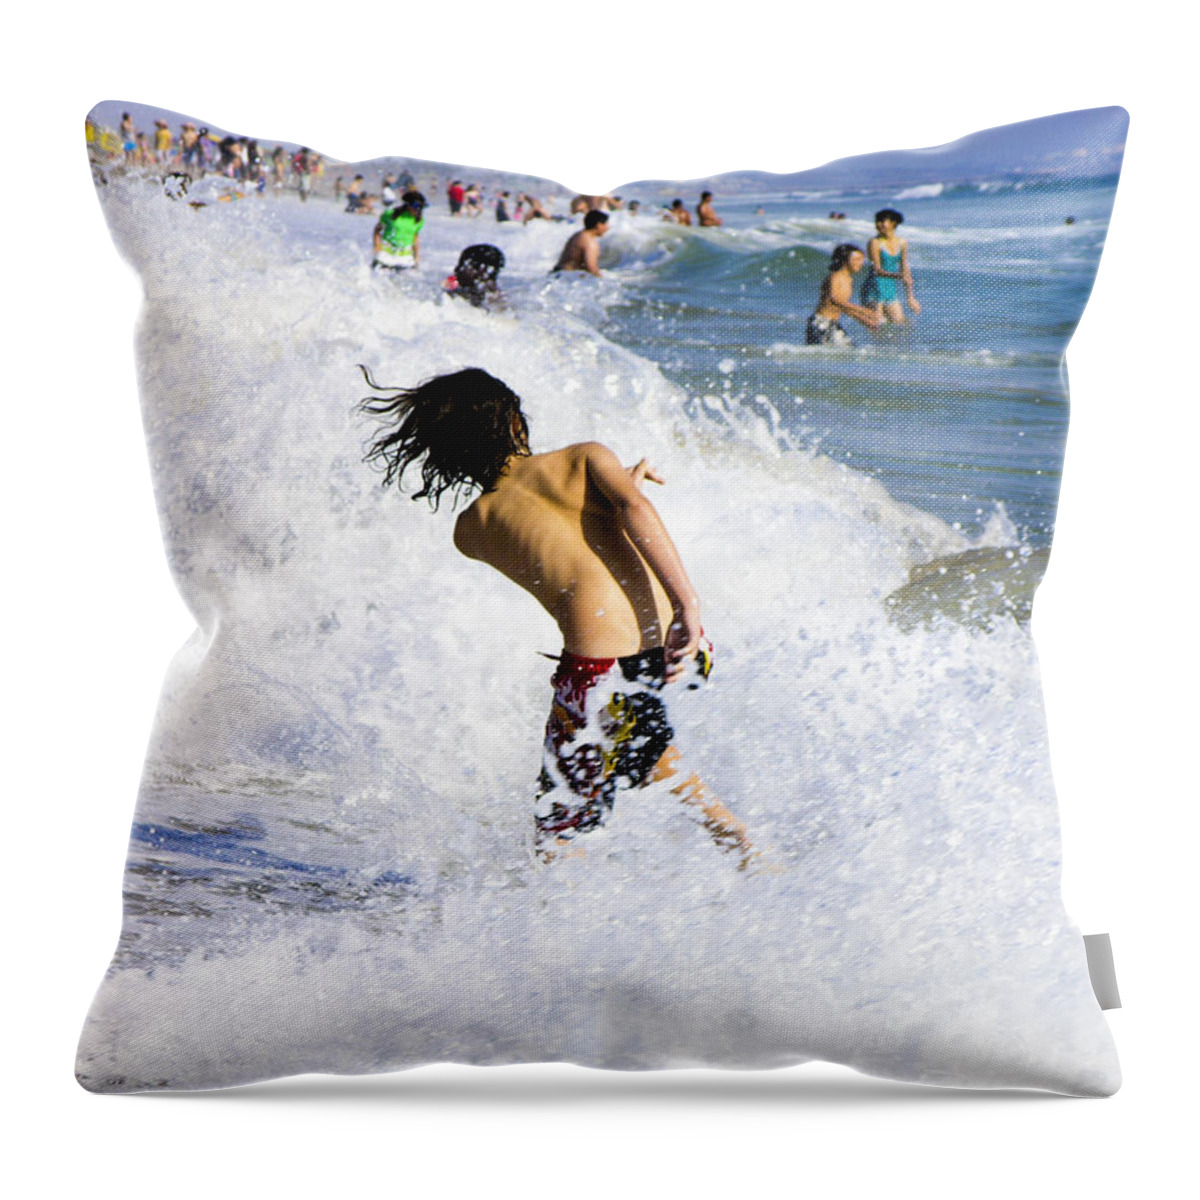 Rebecca Dru Photography Throw Pillow featuring the photograph Wave Jumper by Rebecca Dru